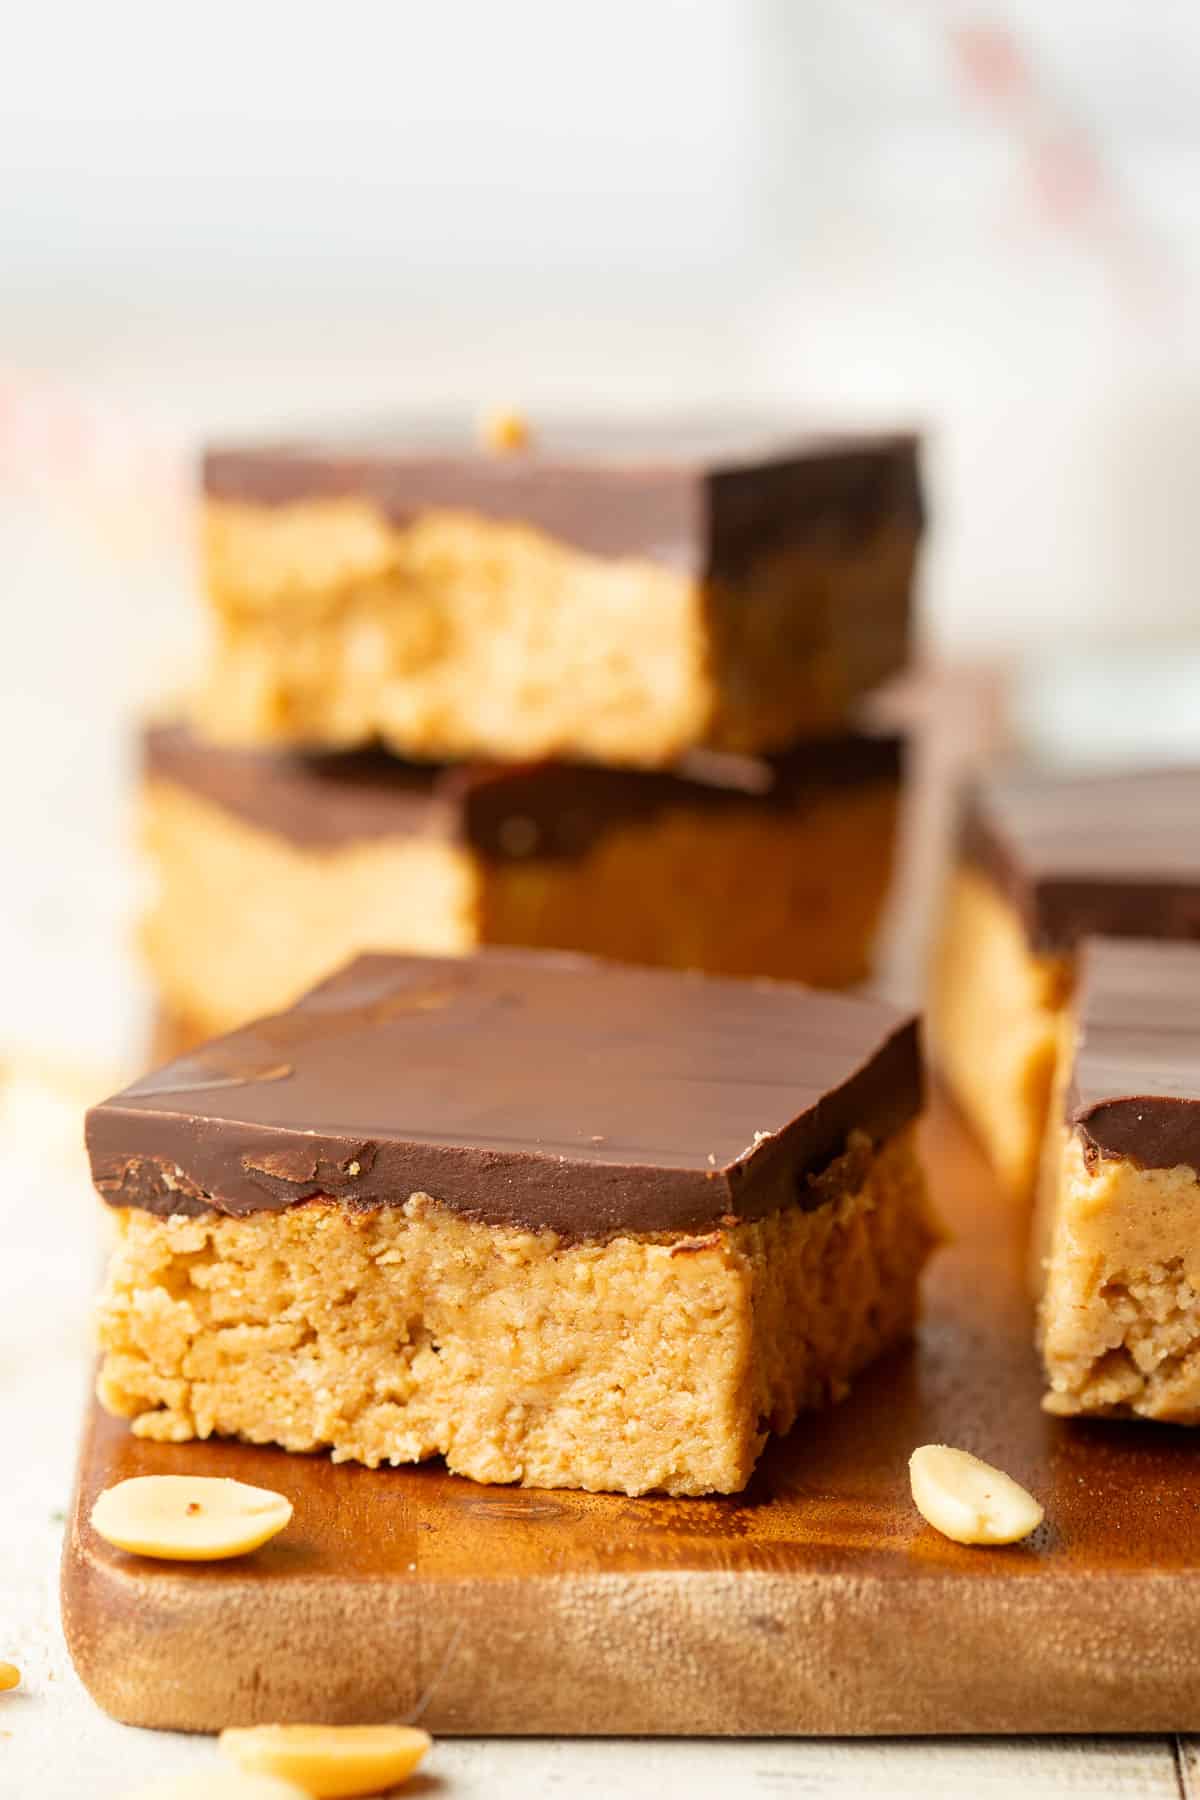 Vegan Peanut Butter Bars arranged on a wood surface with scattered peanuts.